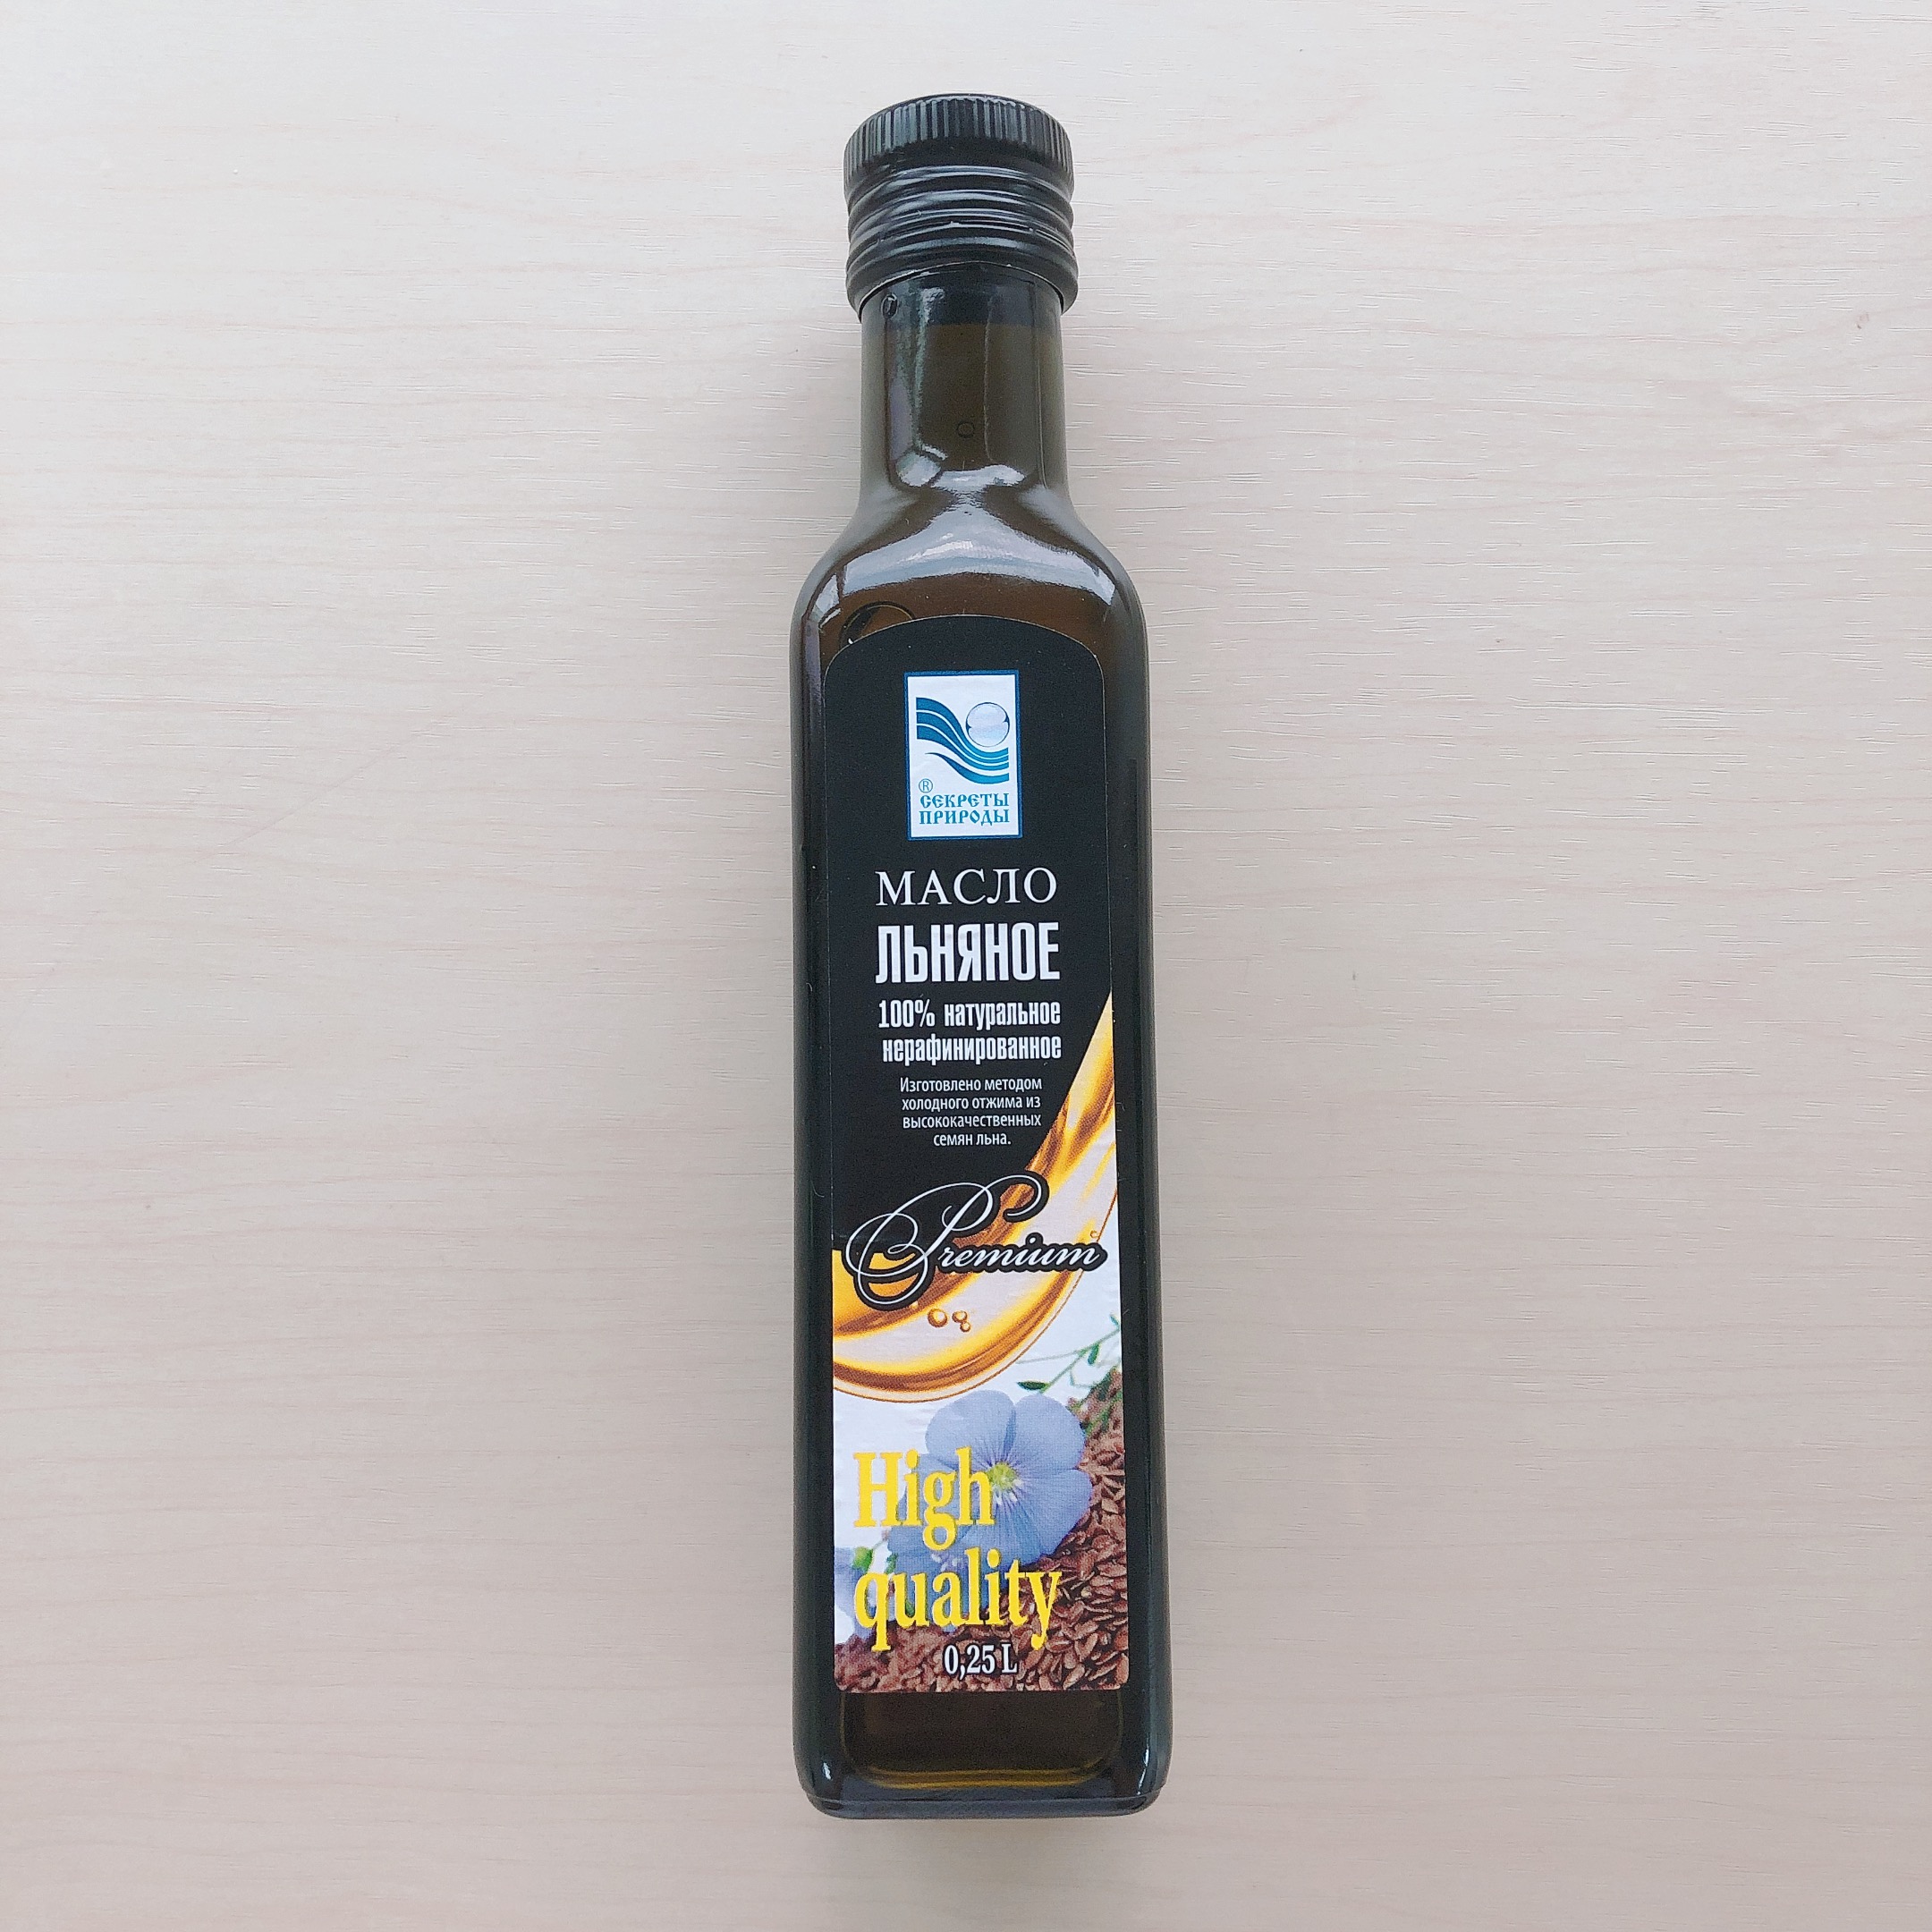 Supply primary cold pressed flaxseed oil